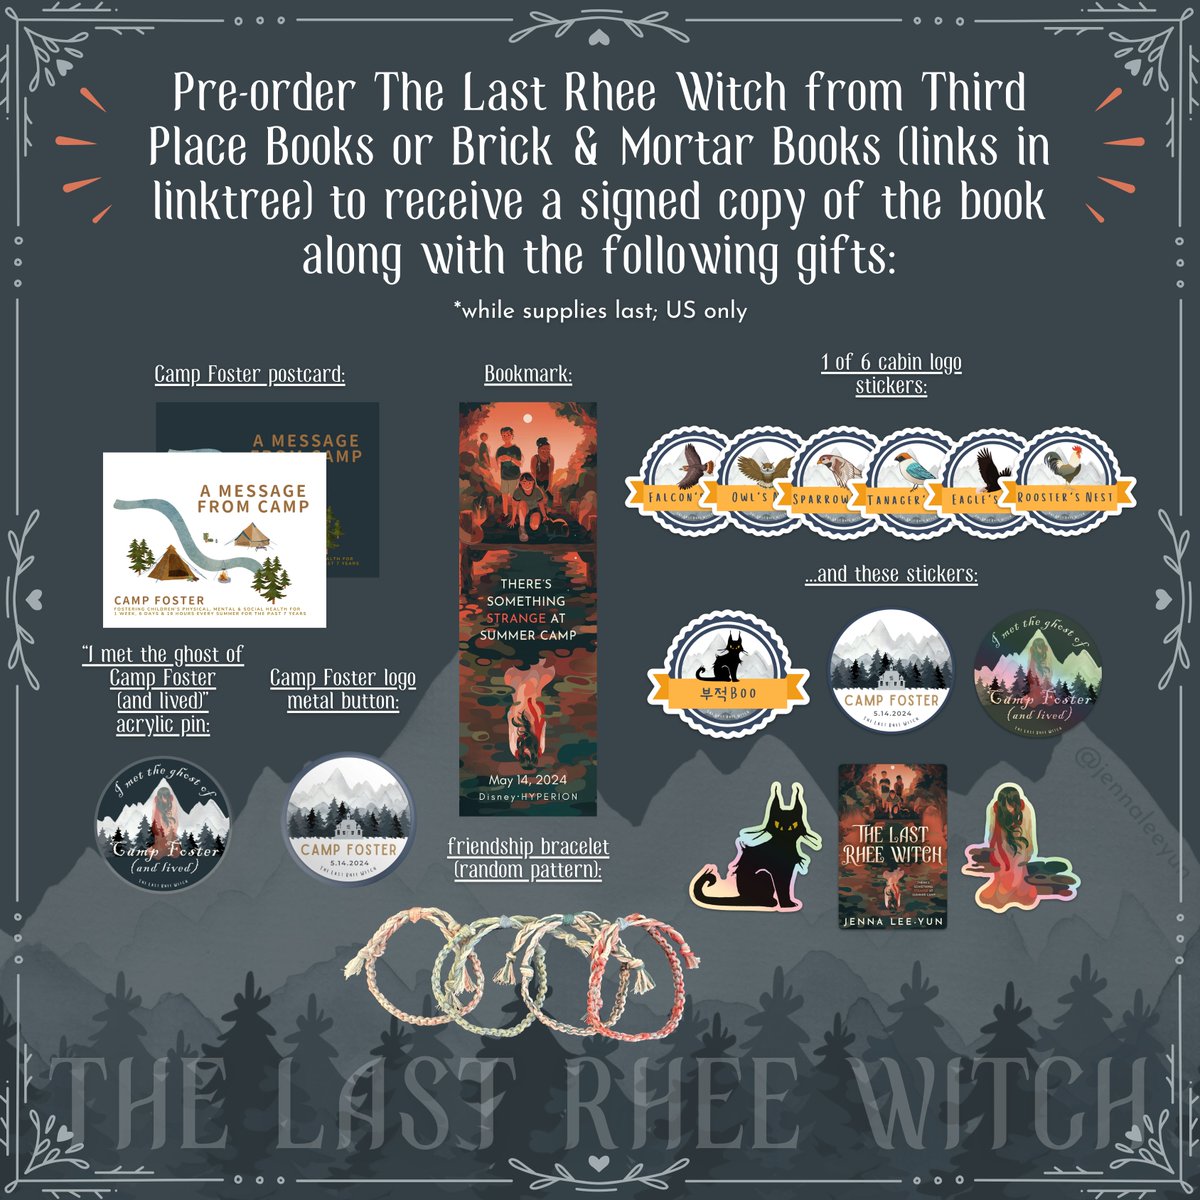 ✨TOMORROW✨ is the release of The Last Rhee Witch!!

That means today is the last day of the pre-order campaign! If you've already filled out the form, keep an eye out for your goodies to arrive--I mailed out a large batch over the weekend 👀🥳

#thelastrheewitch #2024debuts